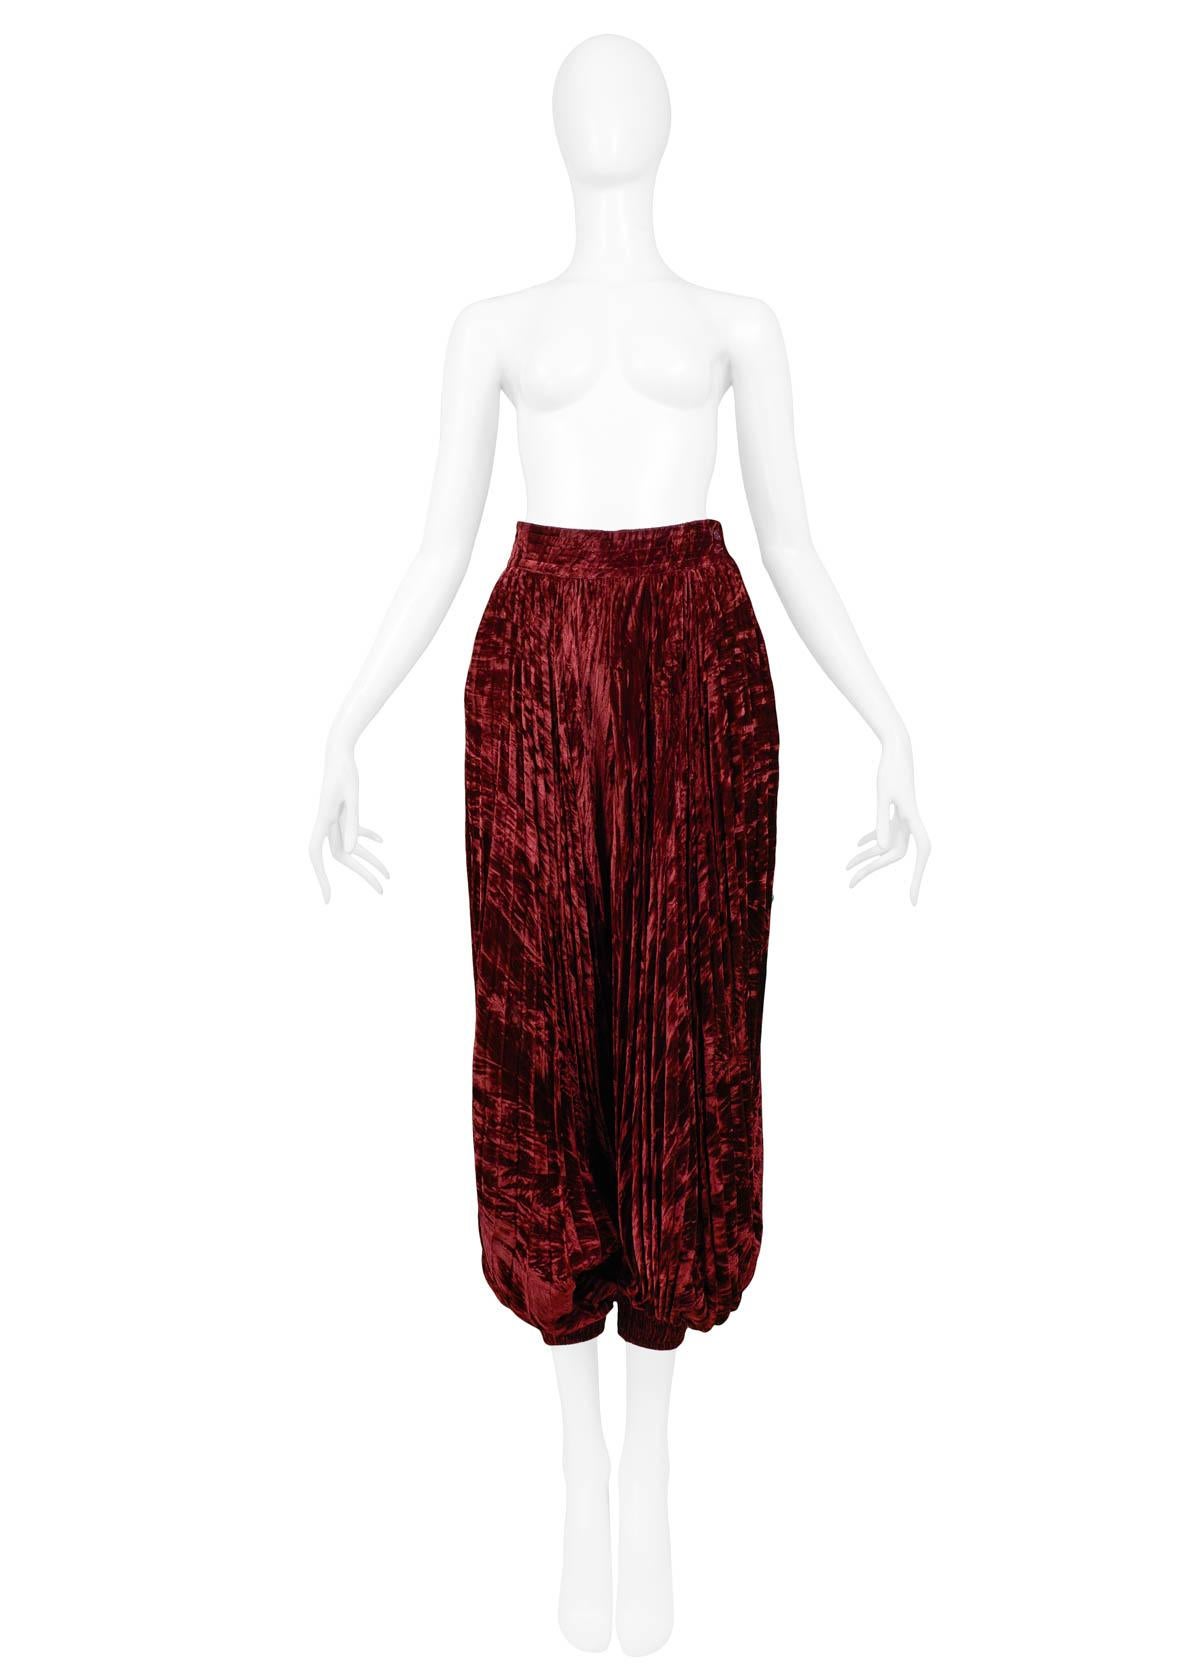 Resurrection Vintage is excited to offer a vintage burgundy YSL velvet harem pants with pleated balloon-style legs and elastic cuffs, a high waistband, and an invisible side zipper.

Yves Saint Laurent
Size 34
Velvet
Excellent Vintage